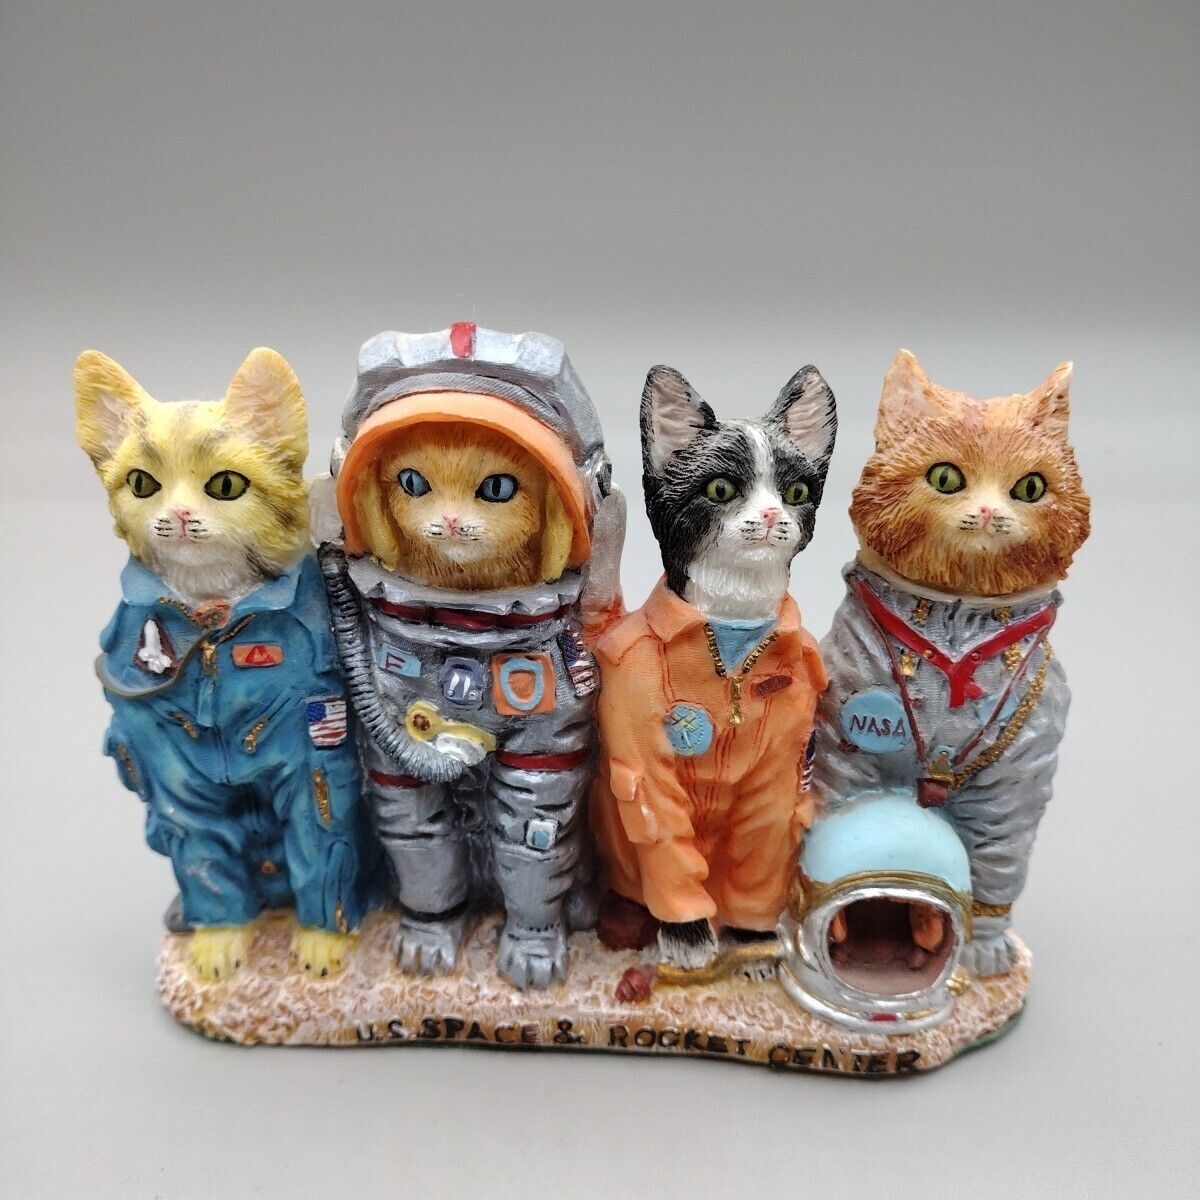 NASA Cats Kennedy Space Center  Prints of Tails Astronauts RARE Collectible